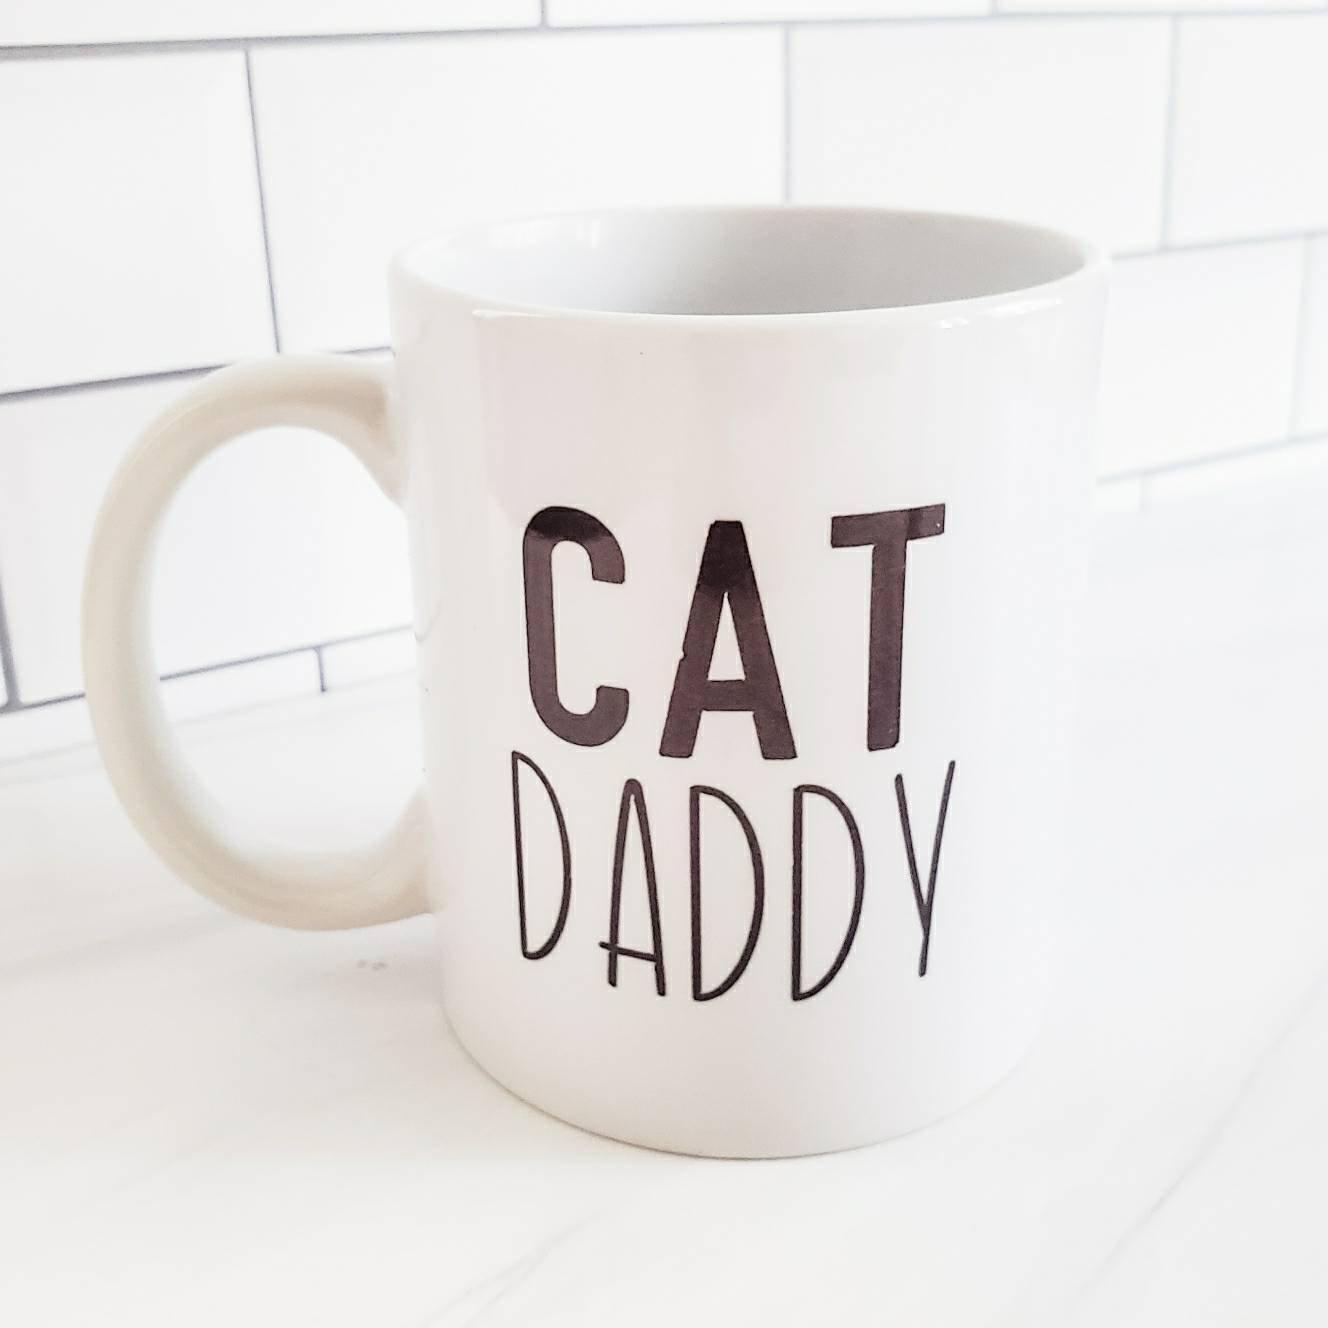 Cat Daddy and Cat Mama Coffee and Tea Mug Salt and Sparkle